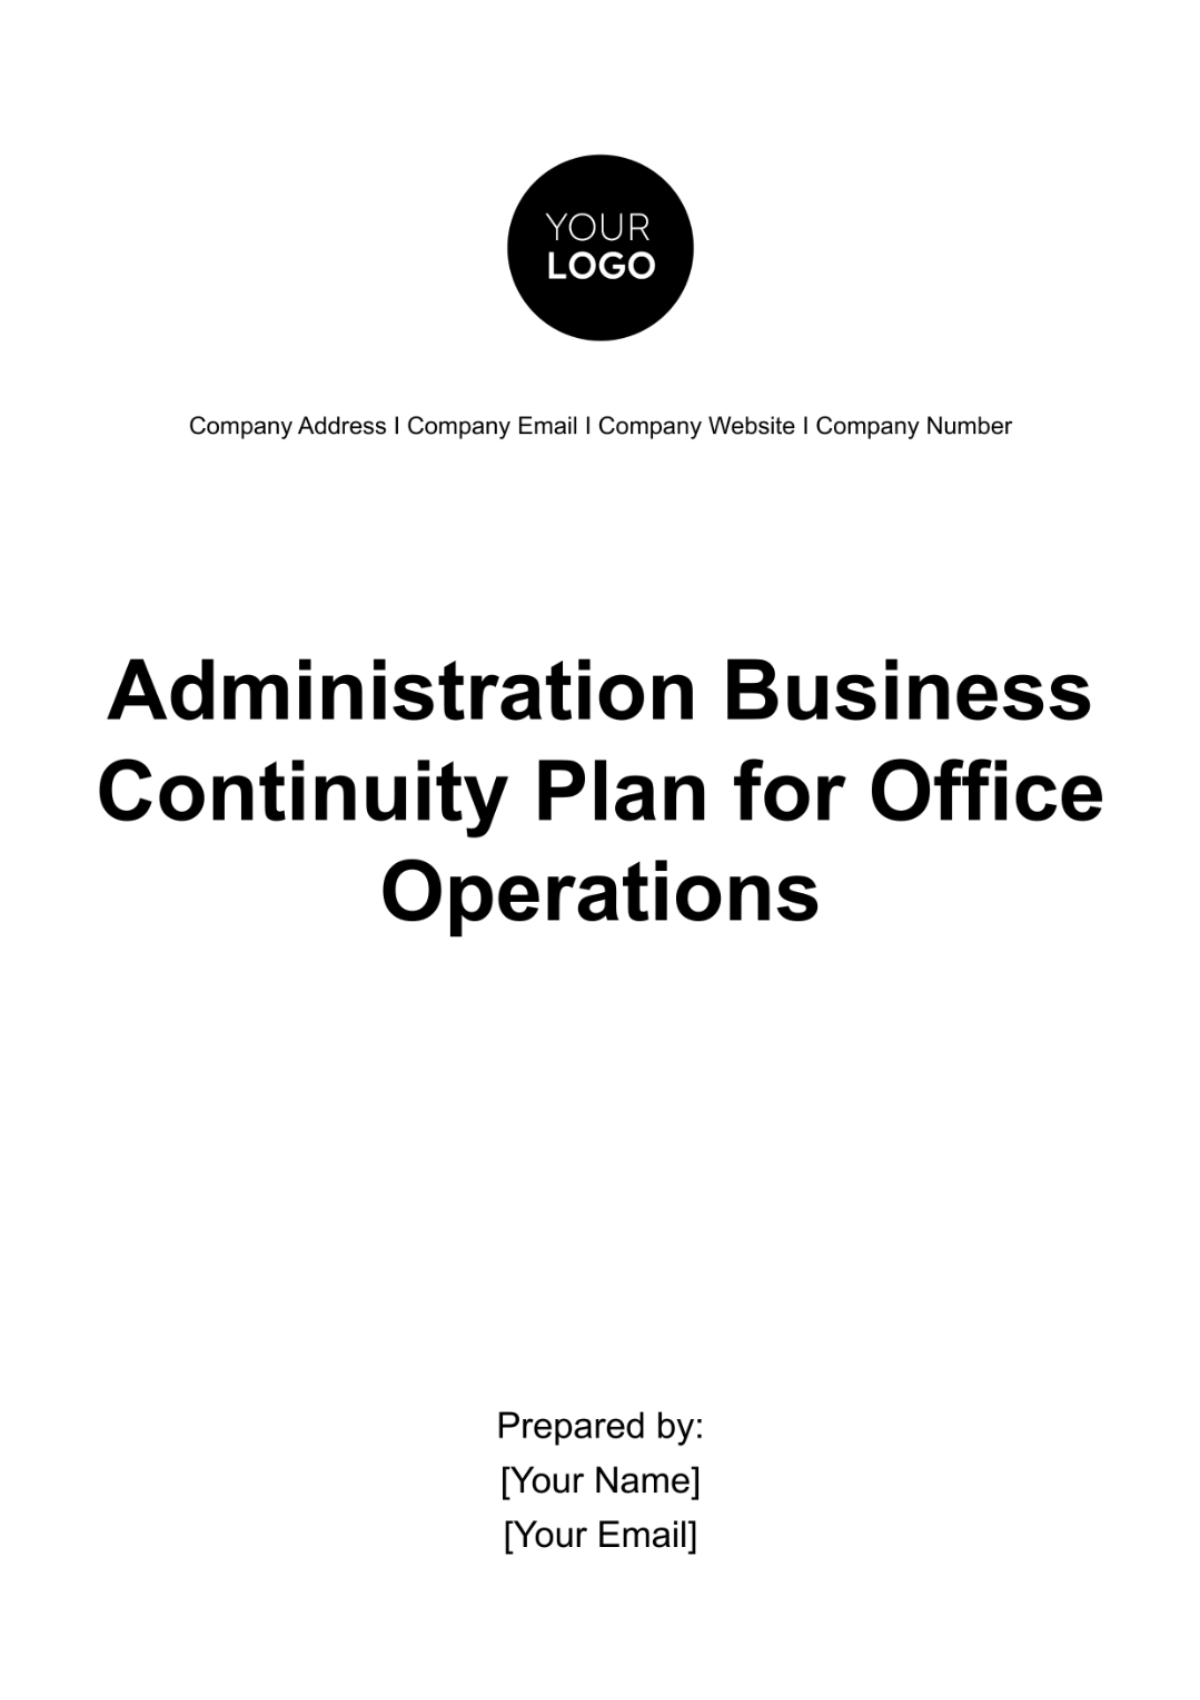 Administration Business Continuity Plan for Office Operations Template